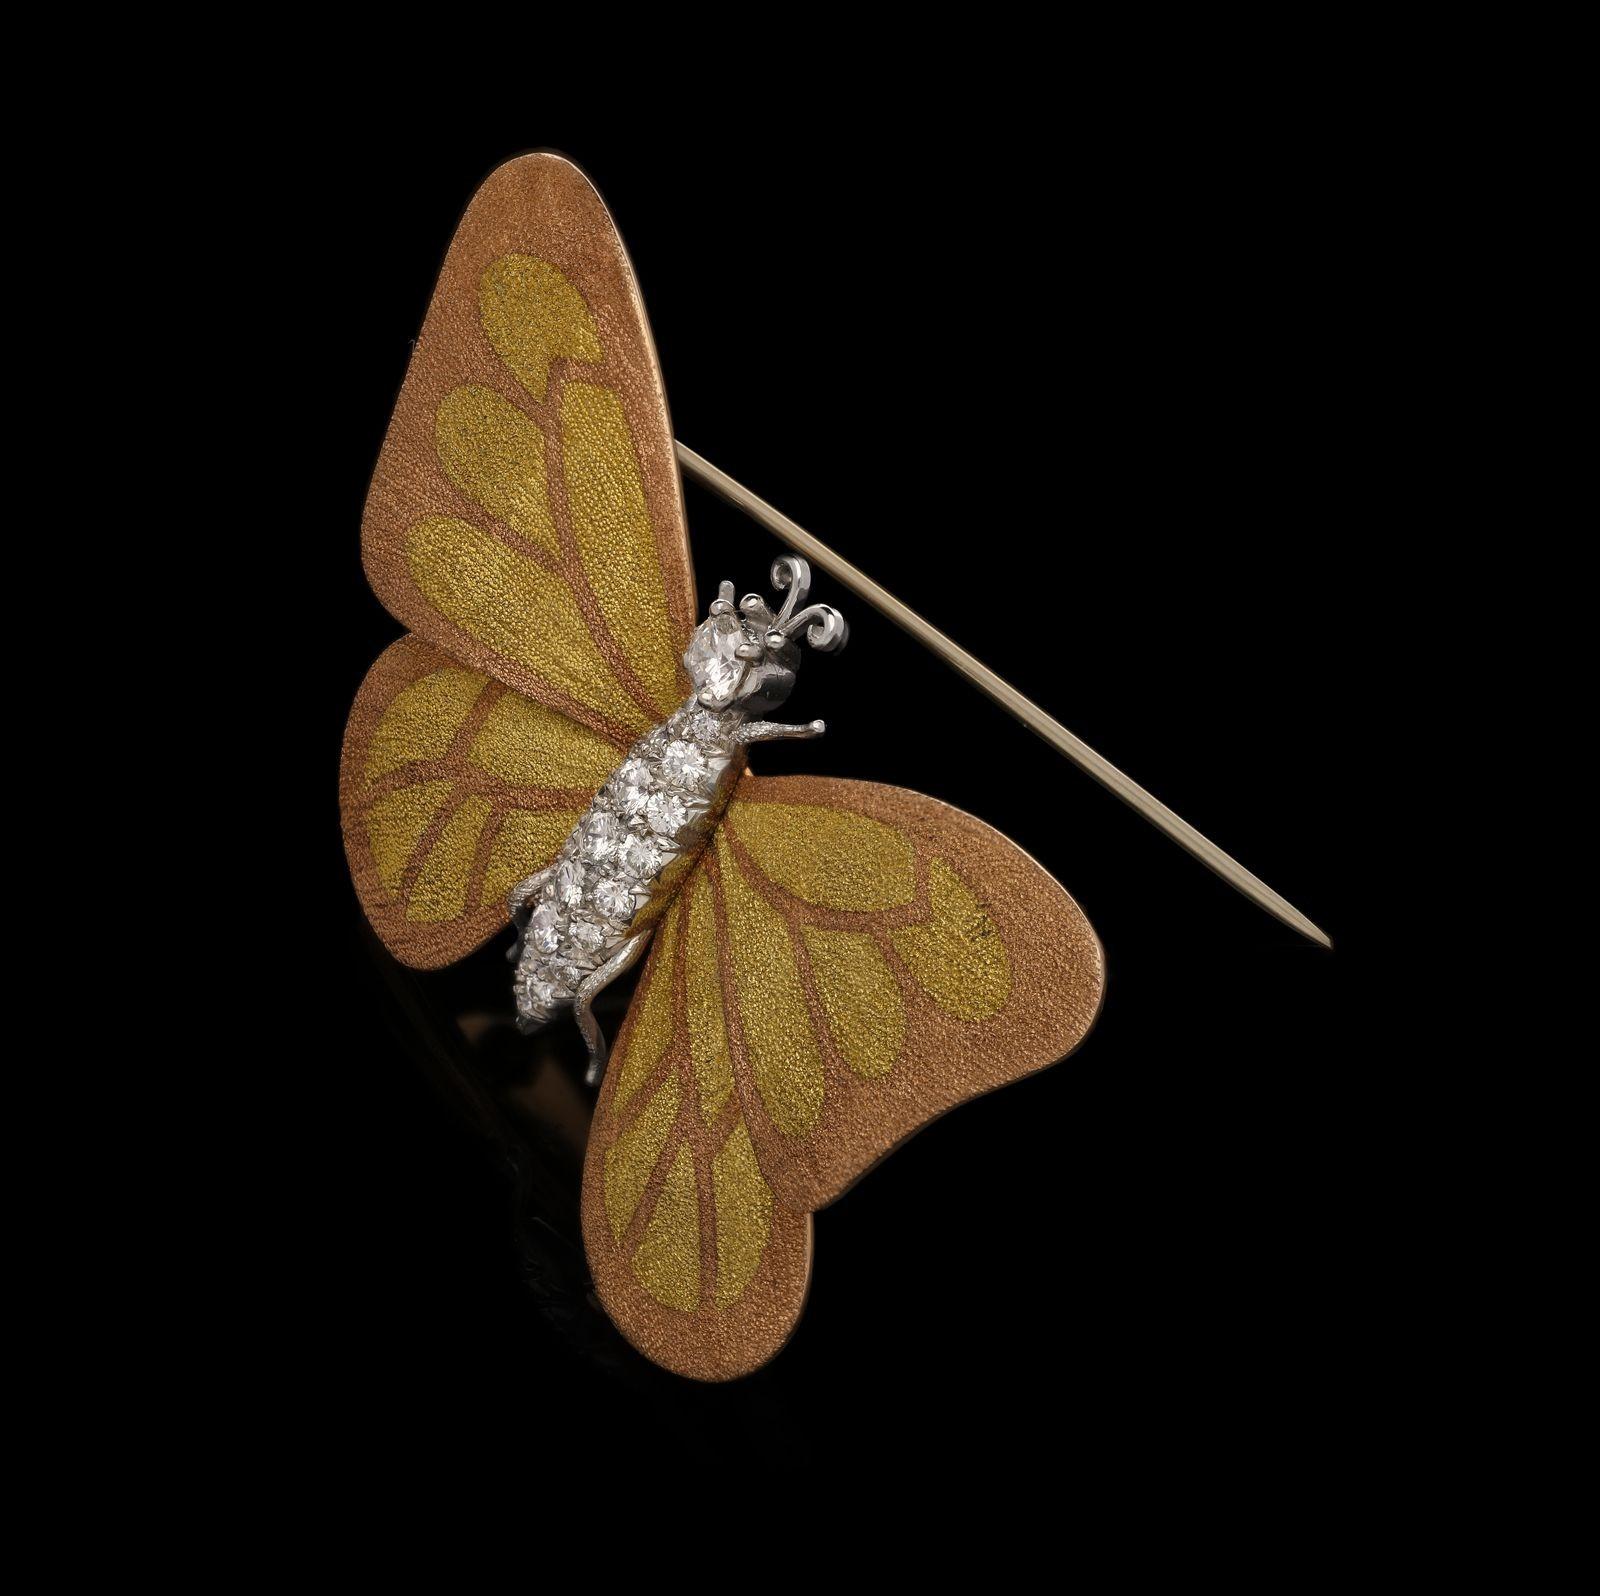 A beautiful and unusual diamond and gold butterfly brooch c.1960s, the body in white gold pavé set throughout with round brilliant diamonds, the head set with a single diamond and with short, curled antennae and the legs with a gently textured